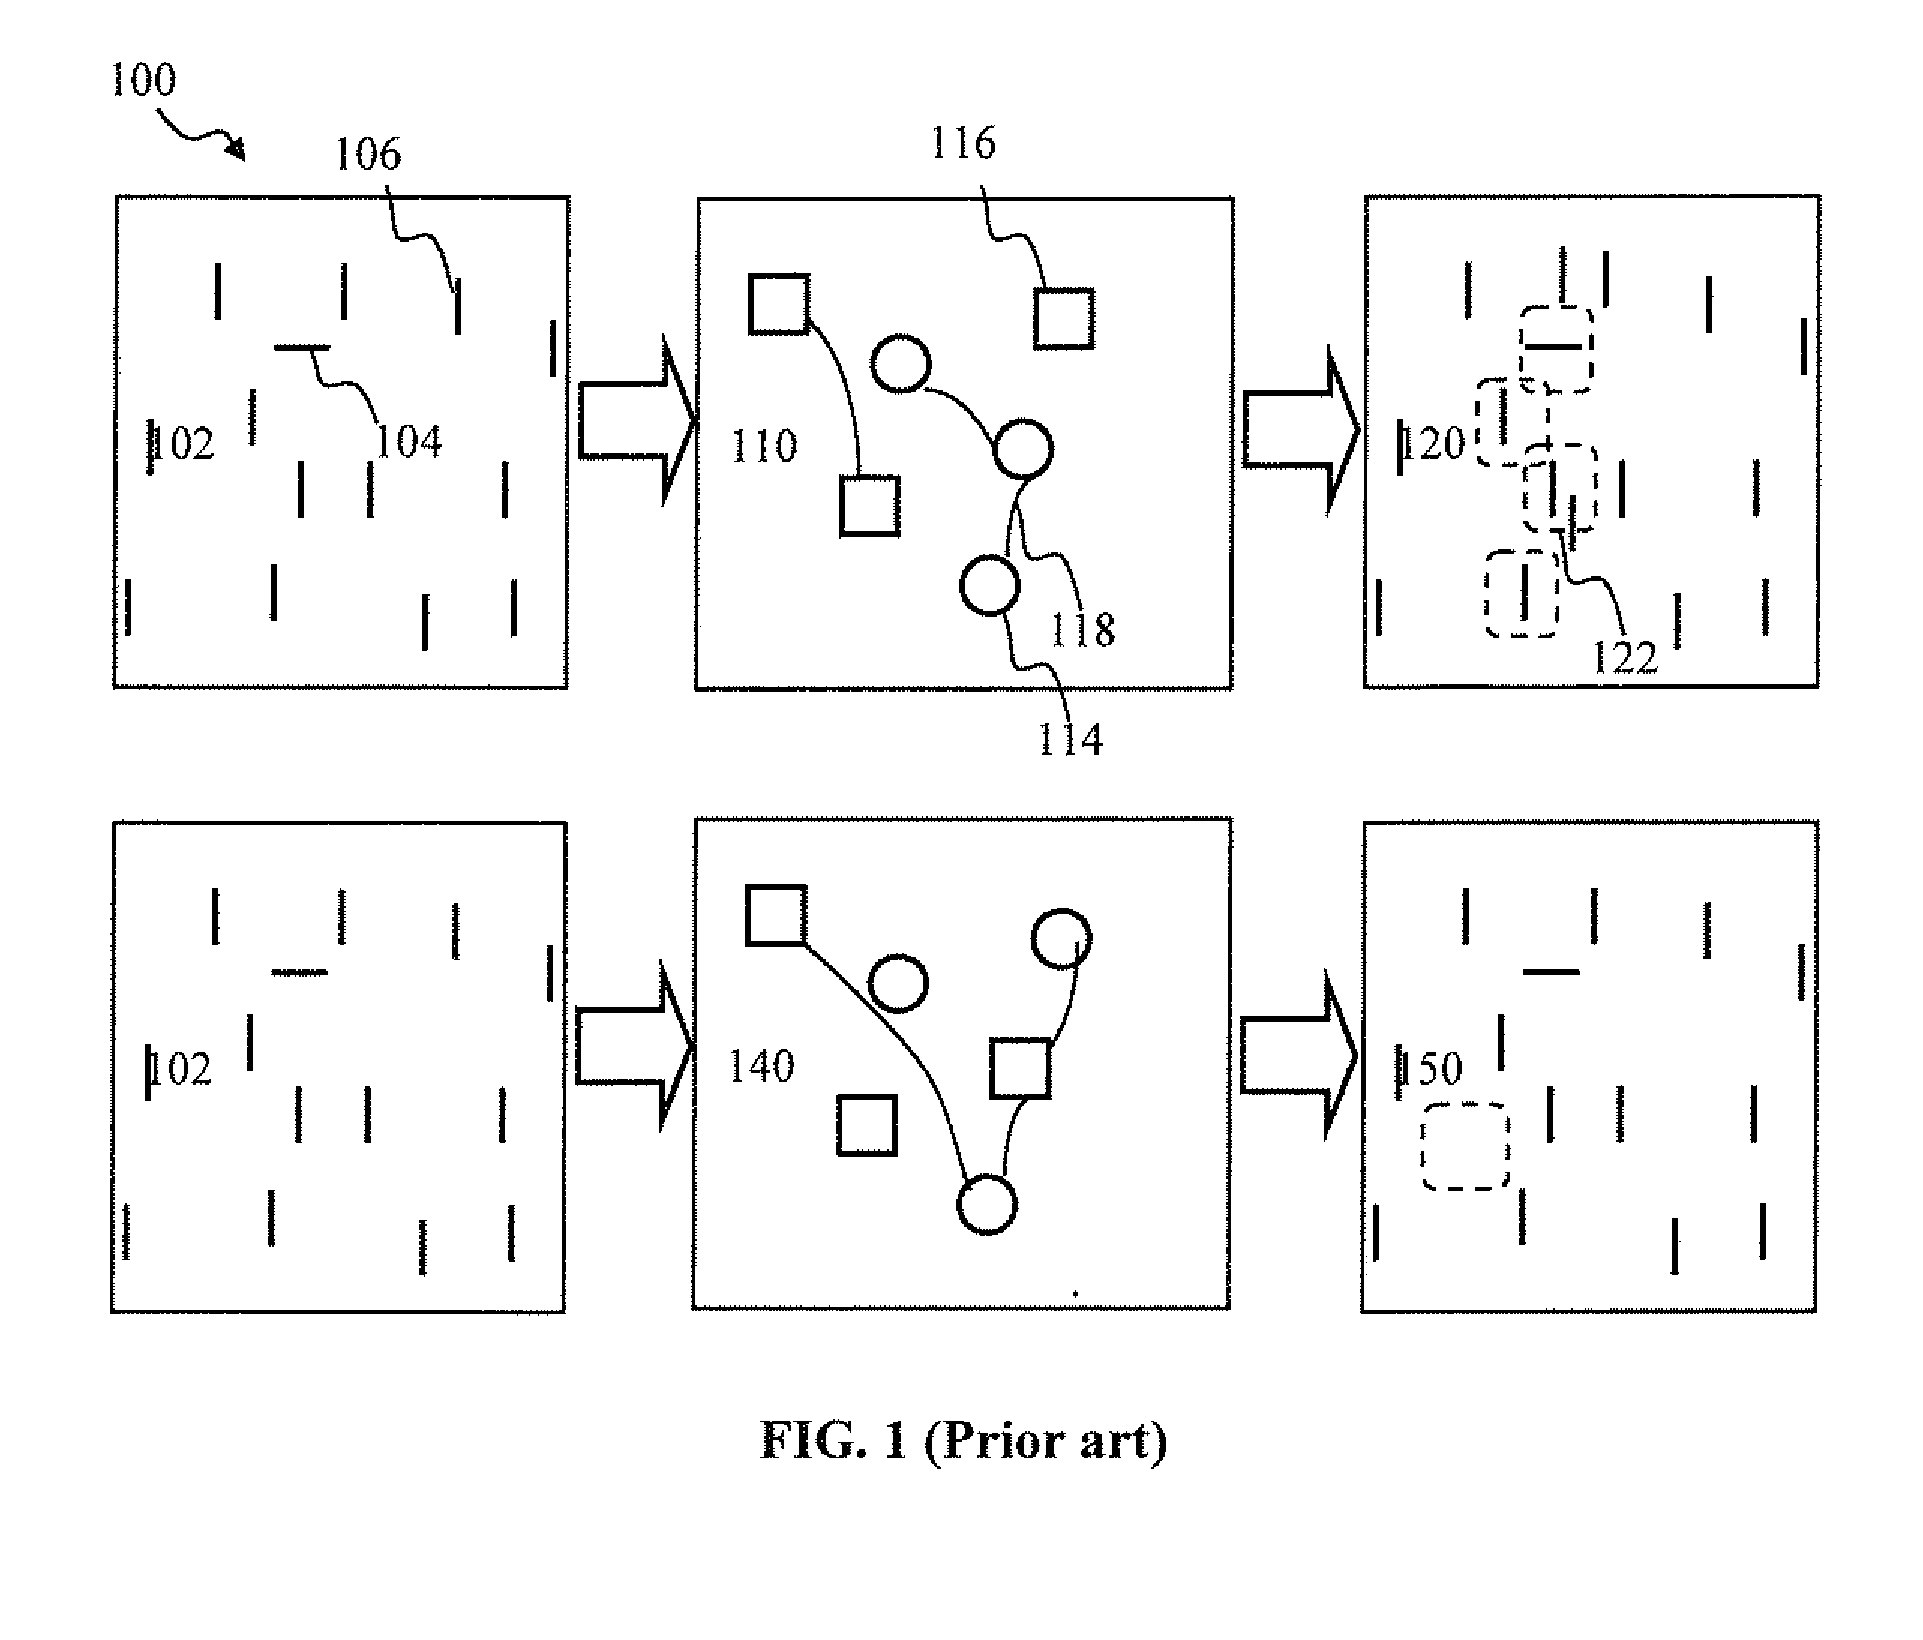 Apparatus and methods for activity-based plasticity in a spiking neuron network